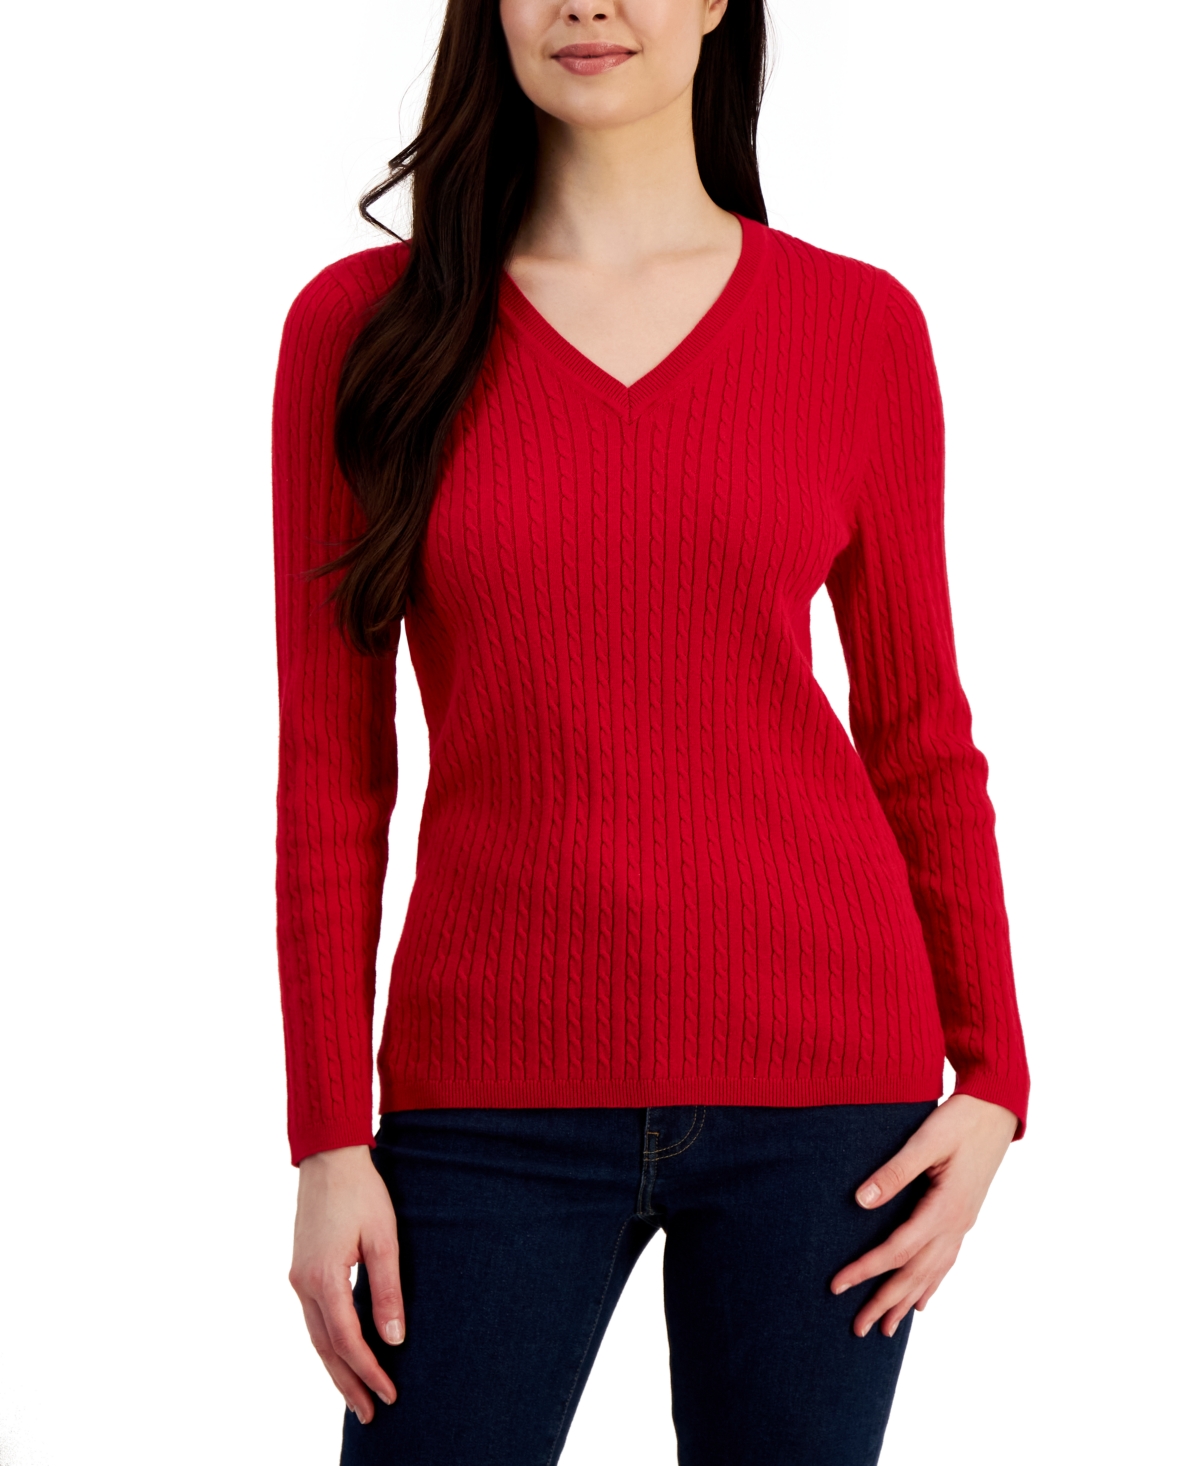 Tommy Hilfiger Women's Cable Ivy V-Neck Sweater